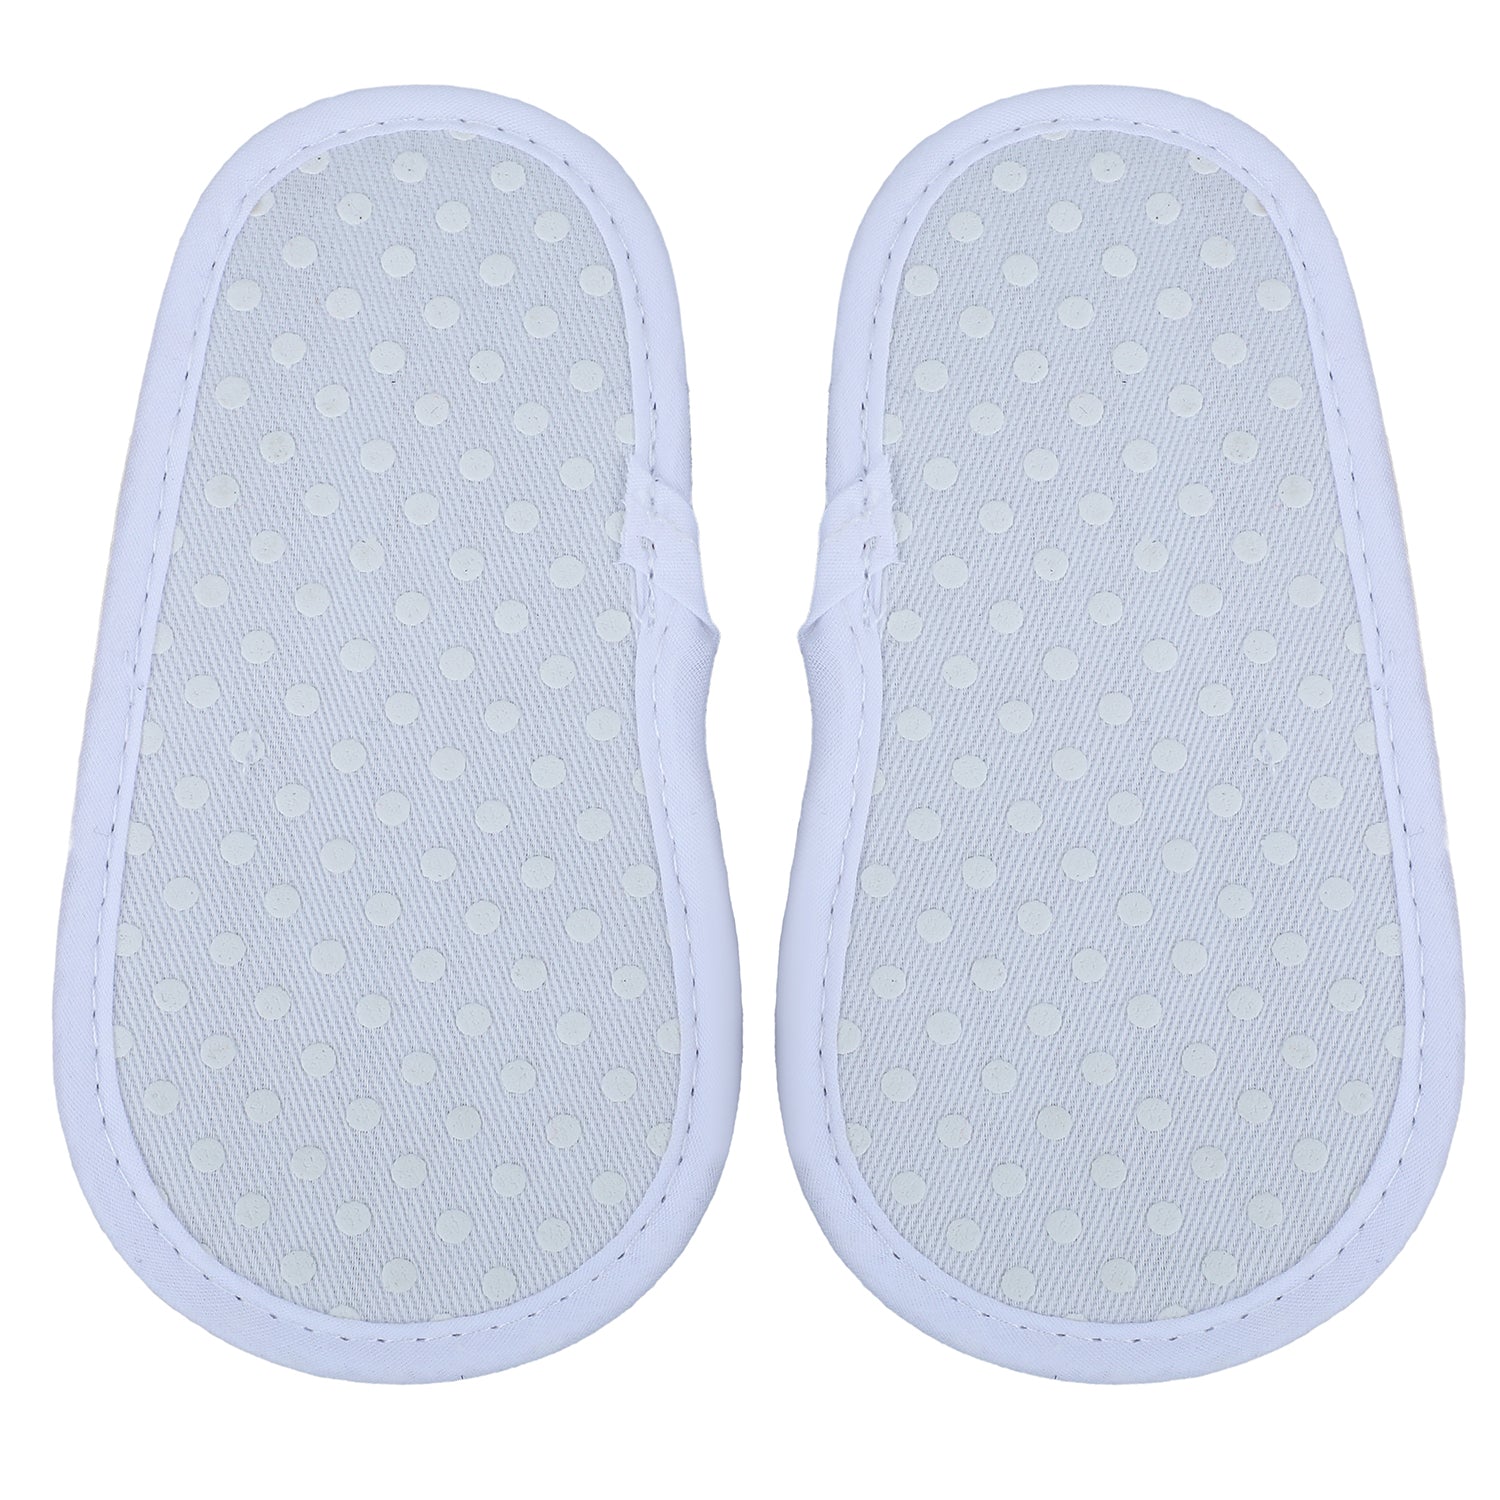 Plain Stylish And Comfortable Open Toe Sandal Booties - White - Baby Moo